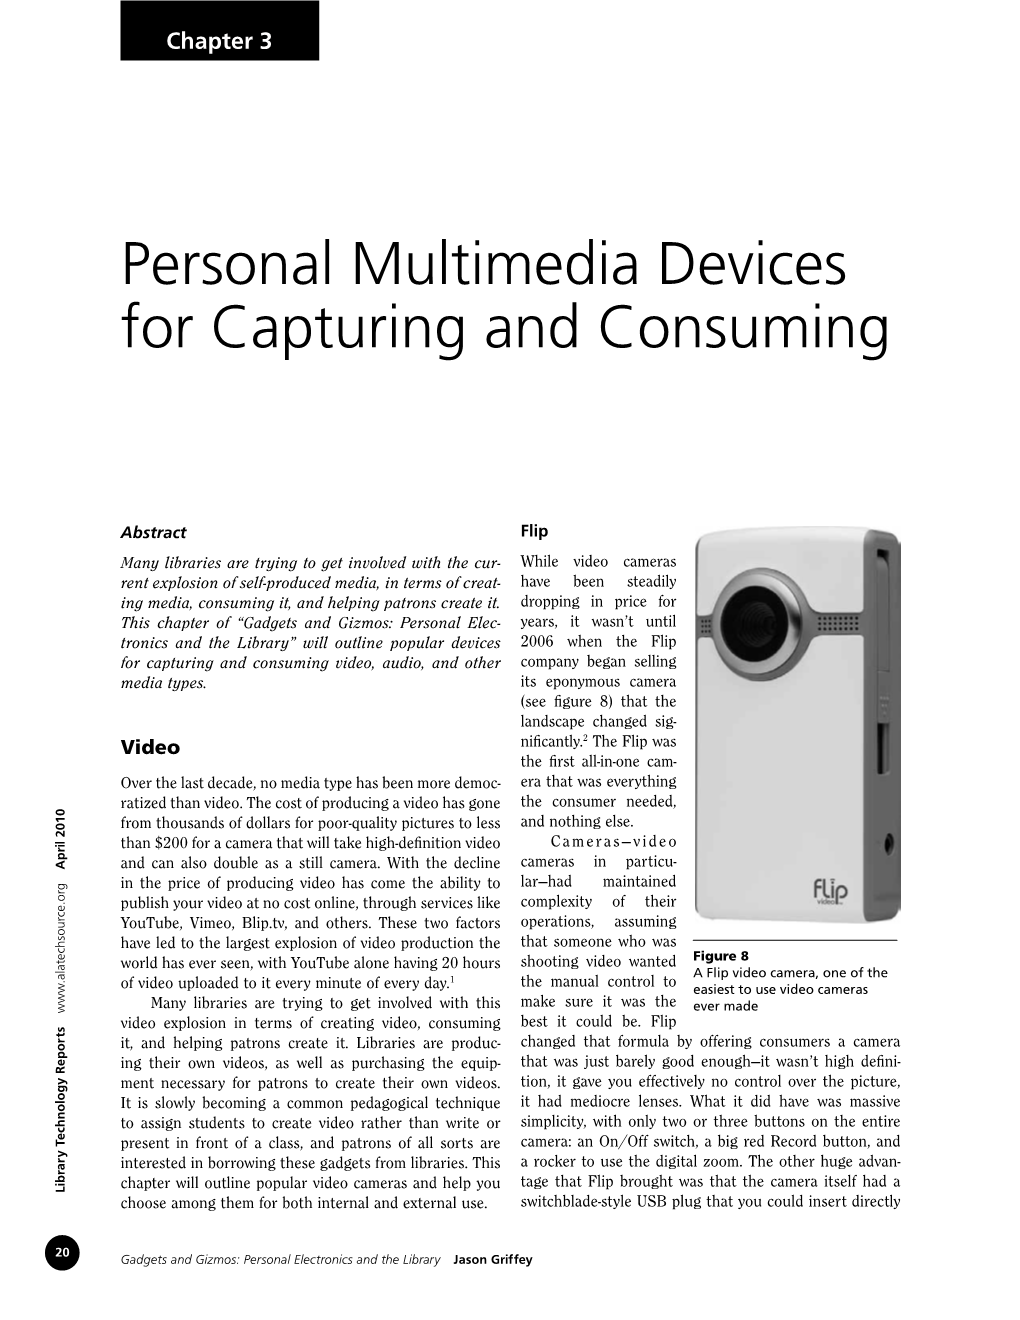 Personal Multimedia Devices for Capturing and Consuming